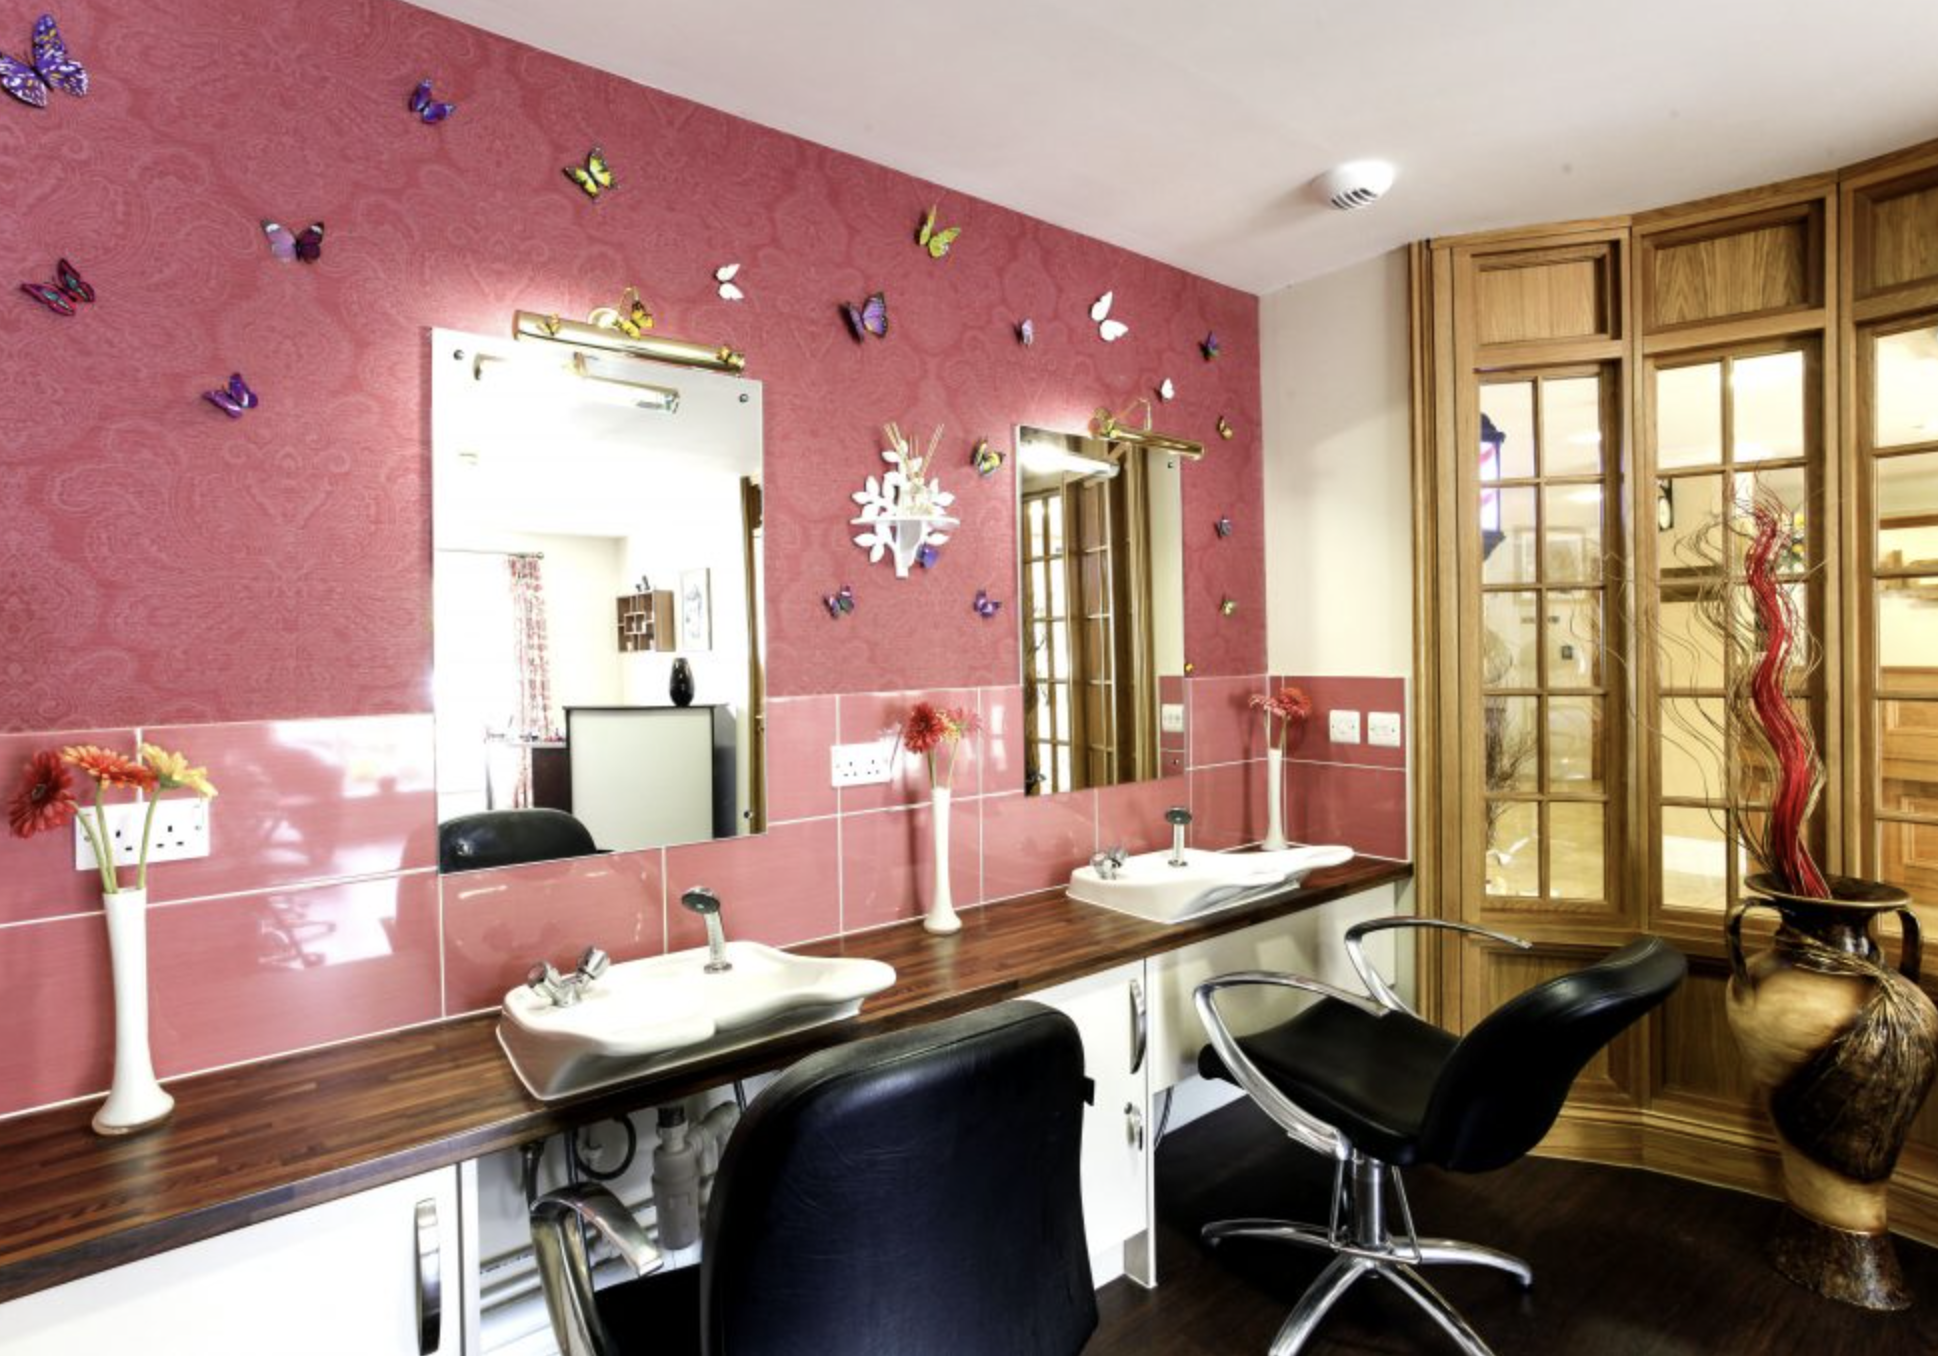 Salon of Cooperscroft care home in Potters Bar, Hertfordshire